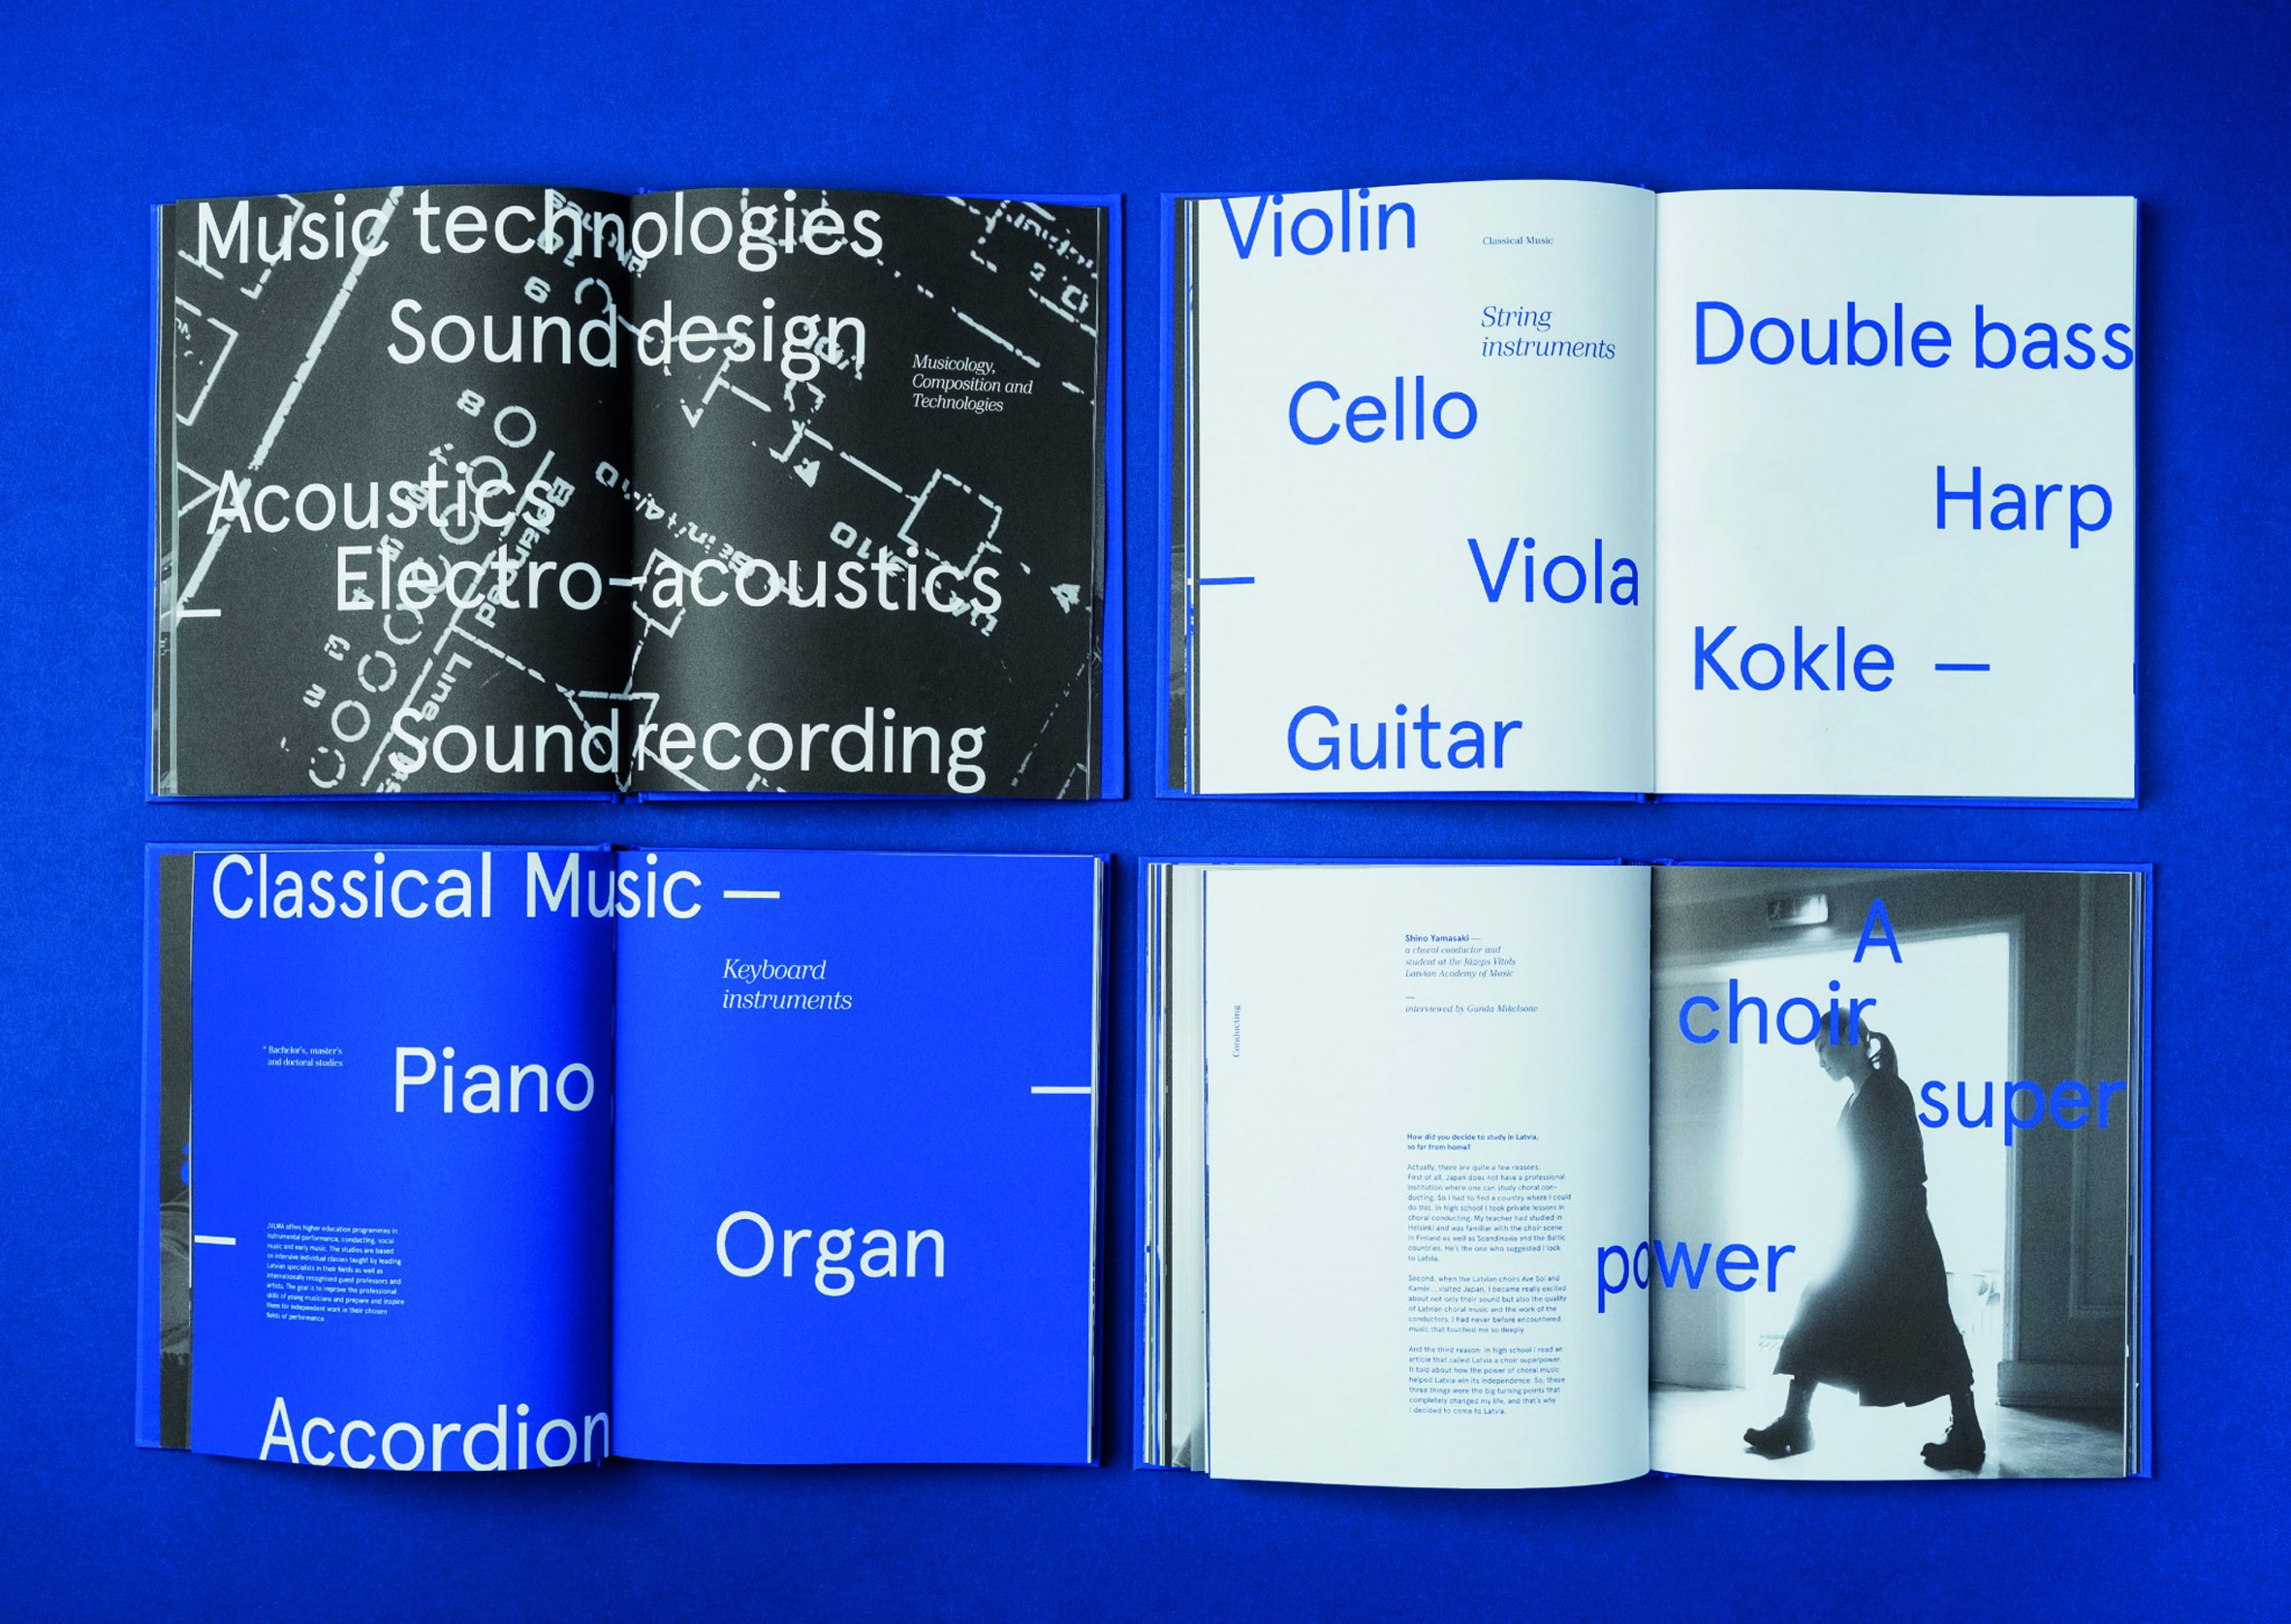 Double-page spreads in black, white and blue in the 100 Years of the Latvian Academy of Music publication